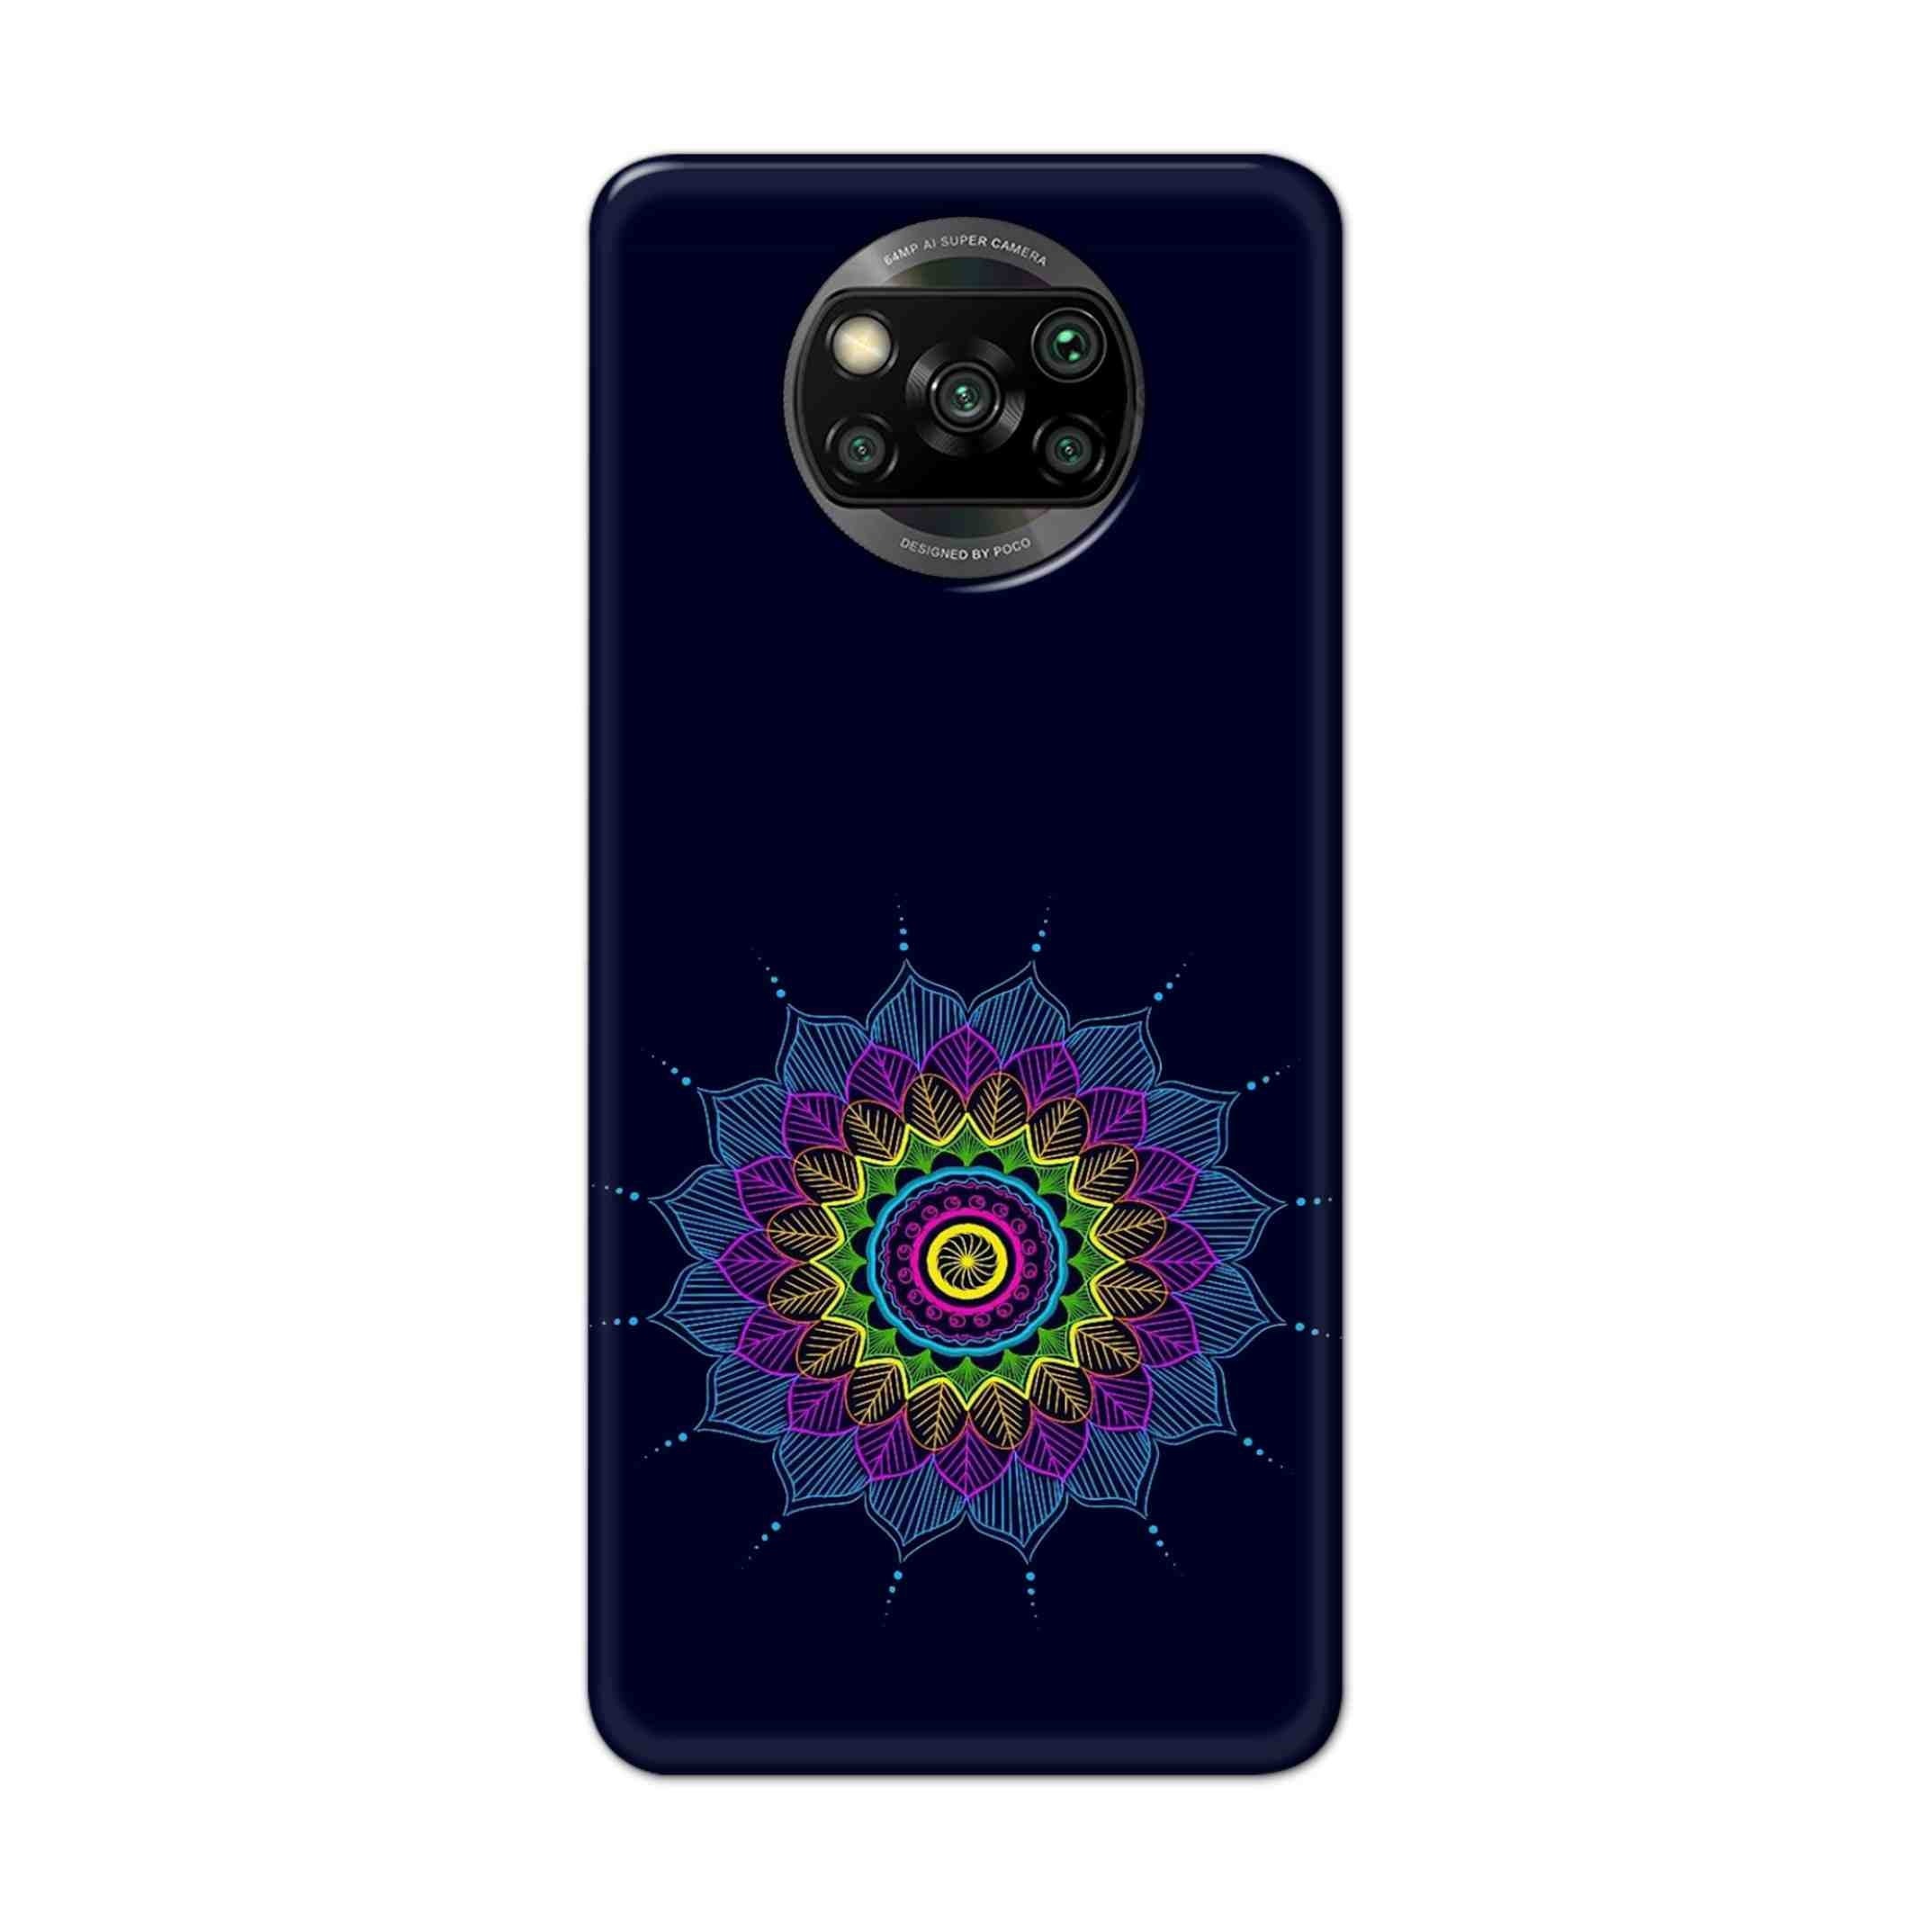 Buy Jung And Mandalas Hard Back Mobile Phone Case Cover For Pcoc X3 NFC Online